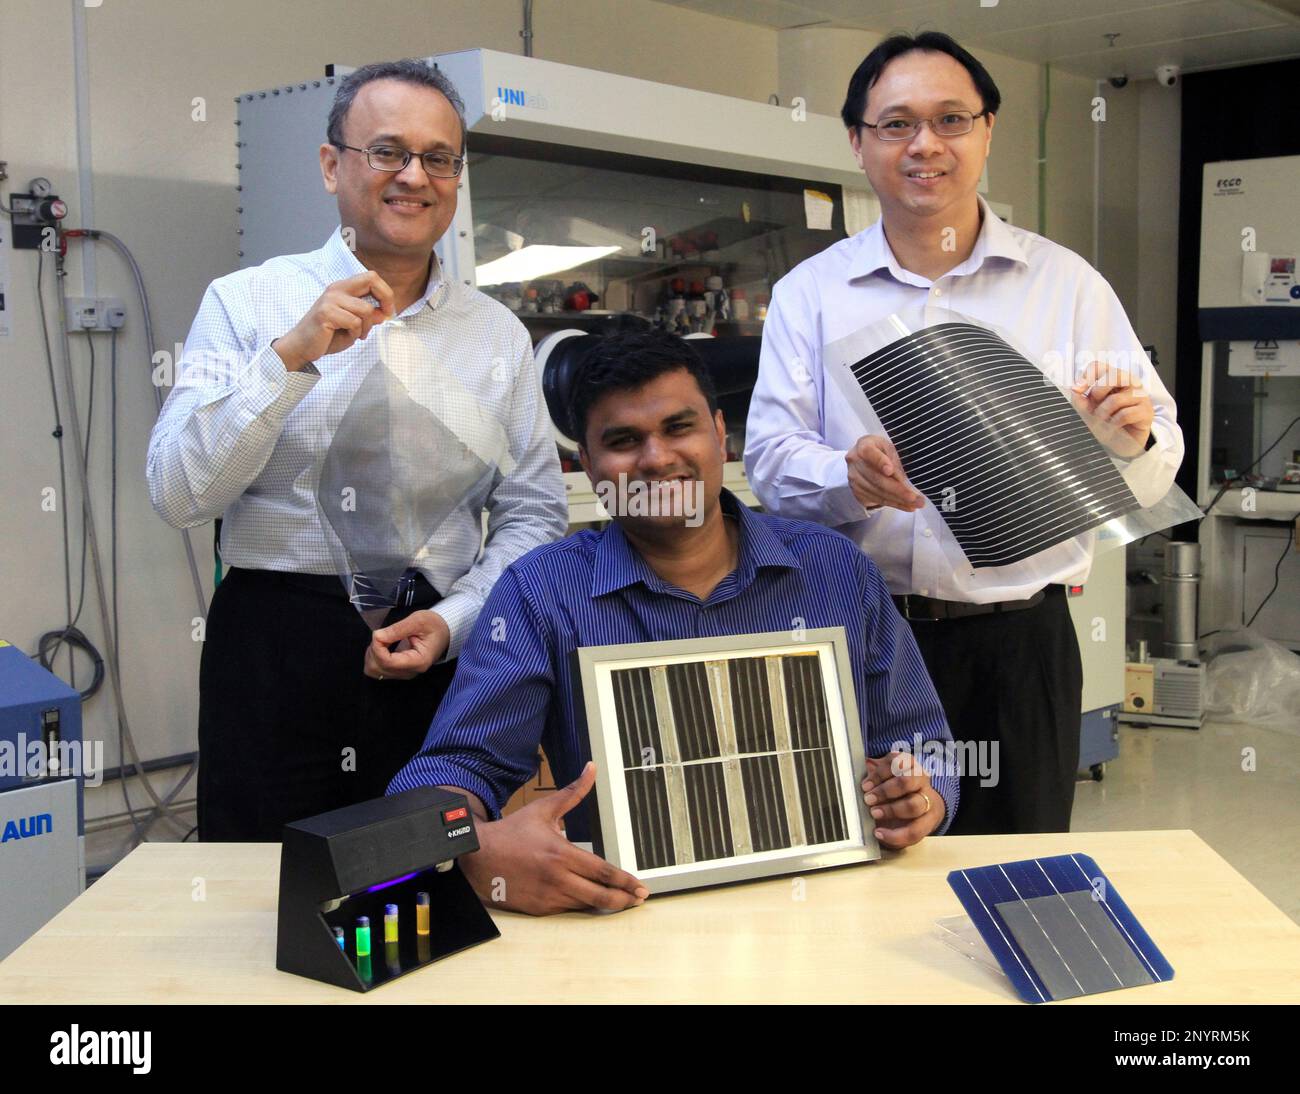 From left) Prof Subodh Mhaisalkar, Executive Director of Energy Research Institute at NTU, Asst Prof Mathews, School of Science and Engineering and Assoc Prof Sum Chien, Associate Dean (Research)